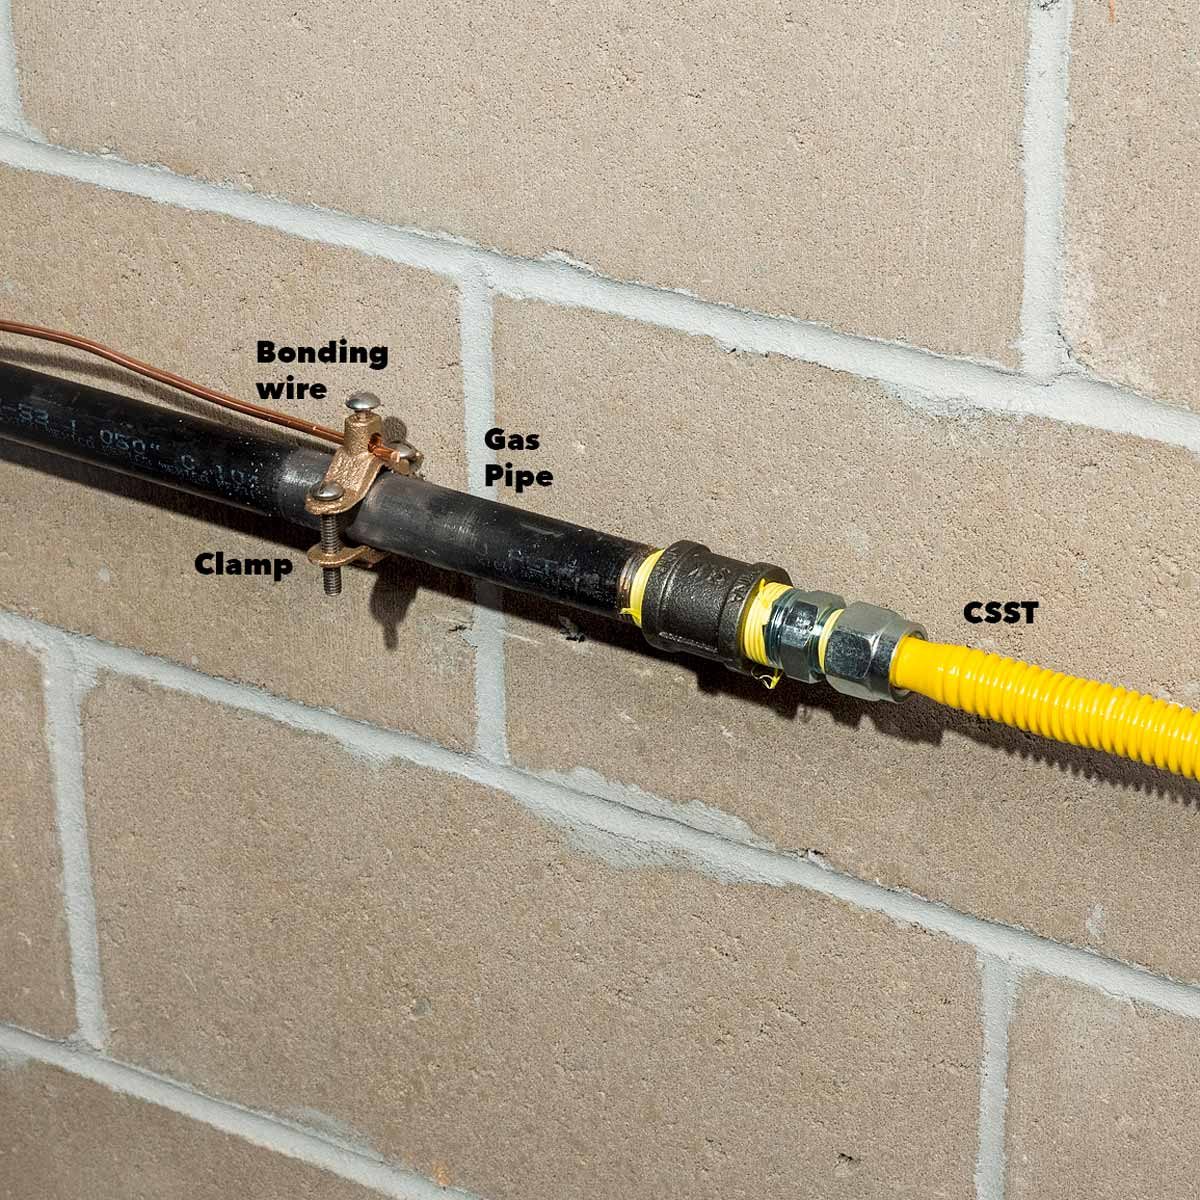 gas line installed correctly